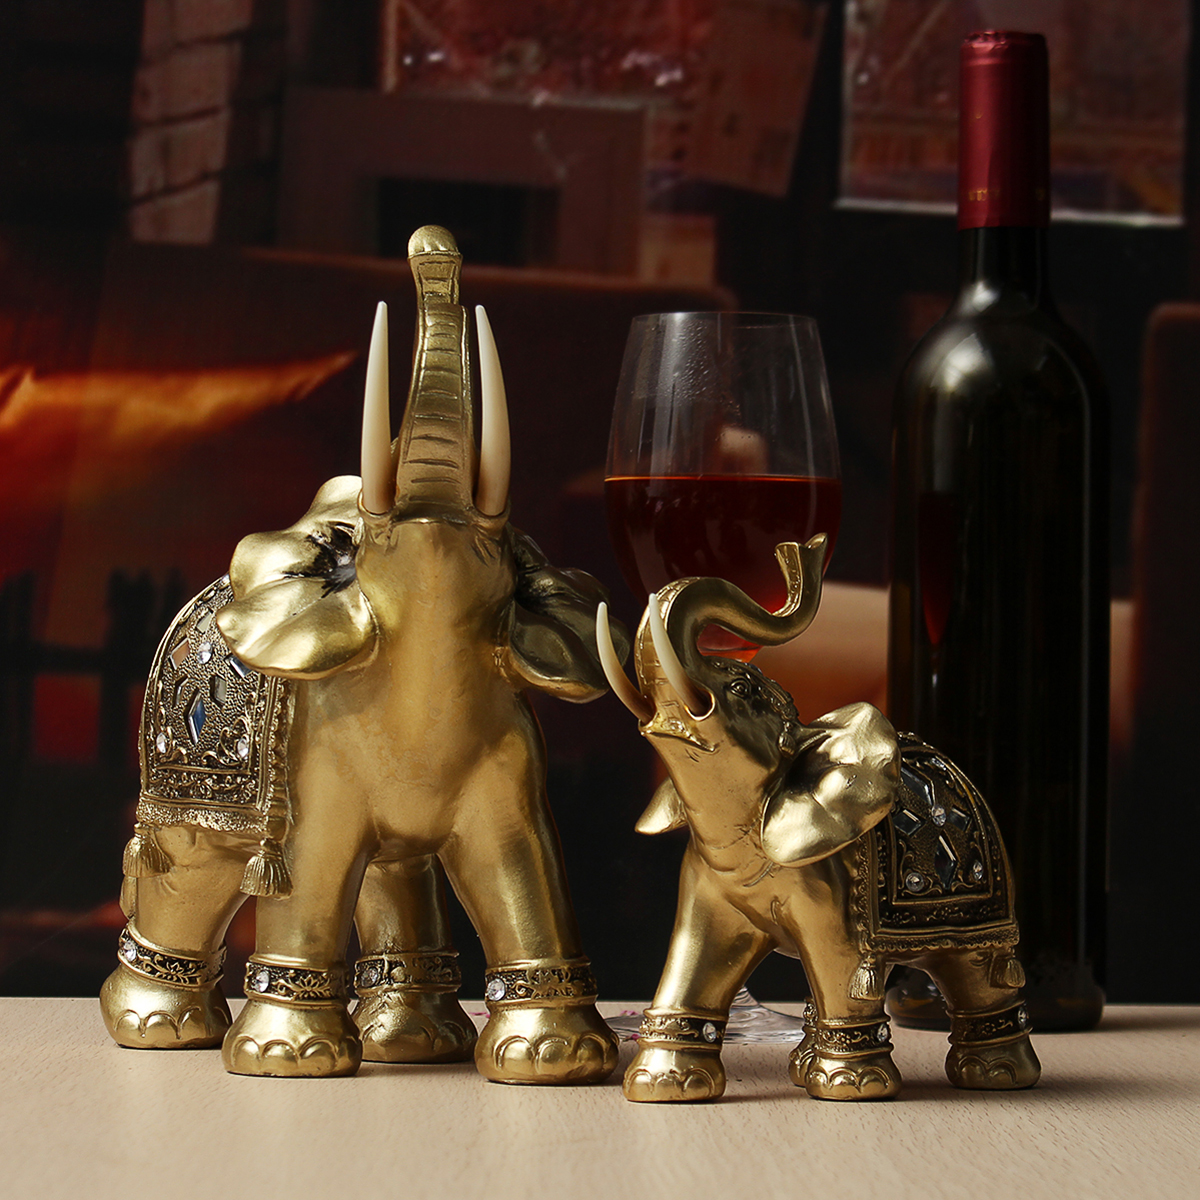 Lucky-Charm-Fengshui-Mascot-Golden-Elephant-Resin-Mini-Statue-Home-Desk-Ornaments-Gifts-Home-Decorat-1634232-4